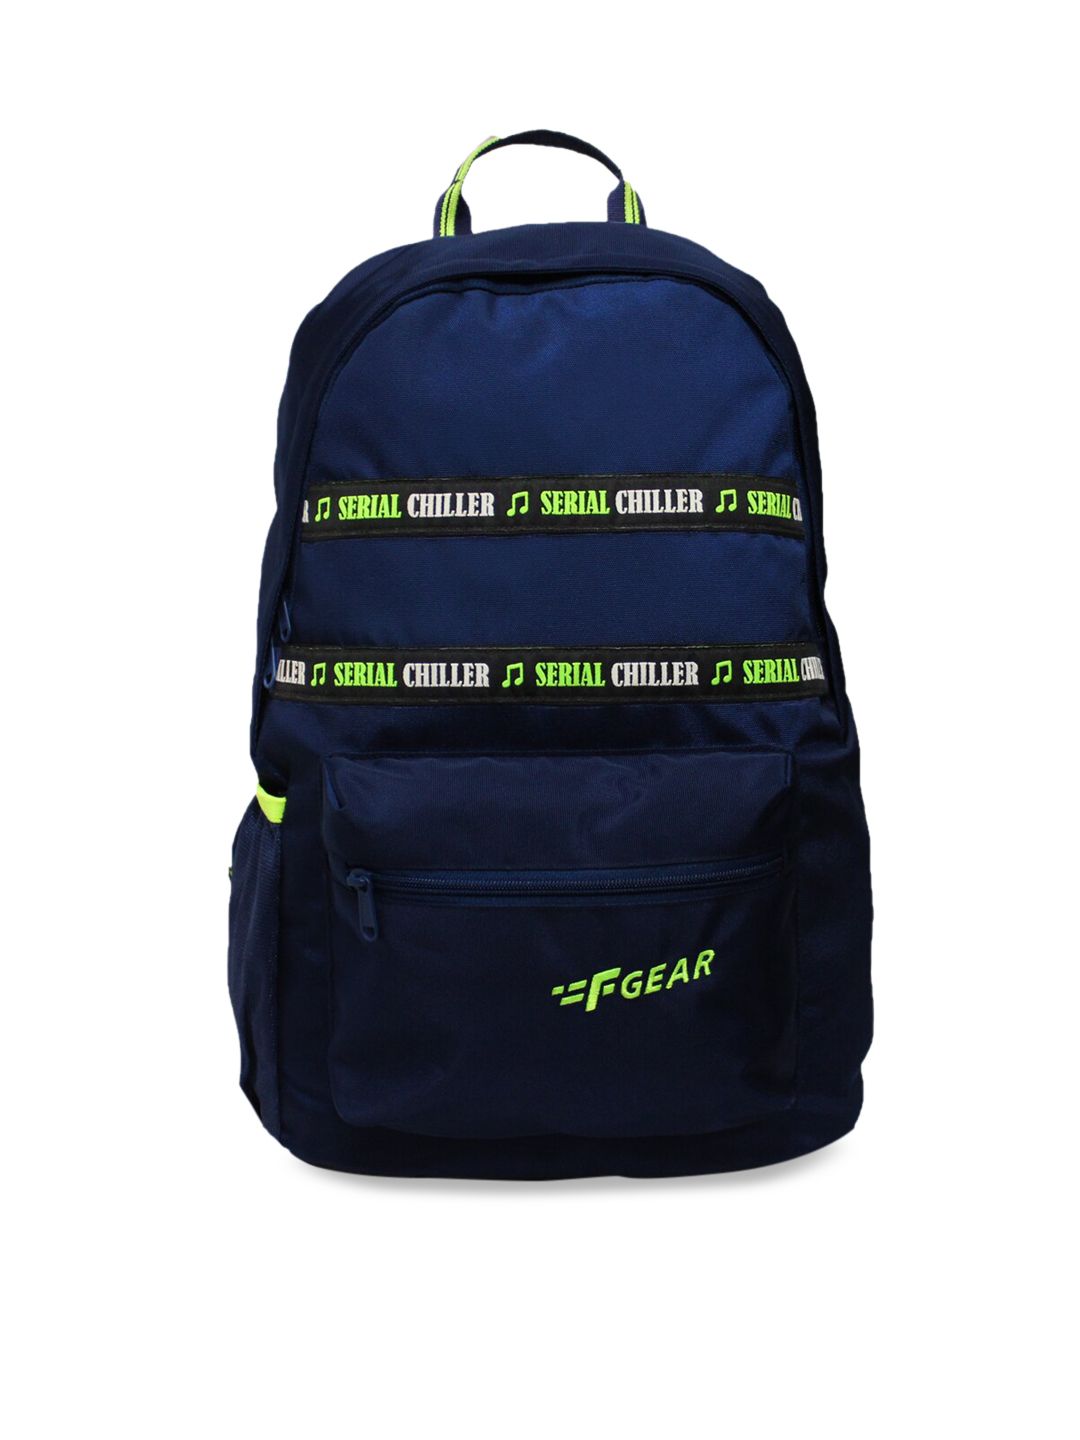 F Gear Unisex Navy Blue & Green Contrast Detailing Medium Backpack Price in India